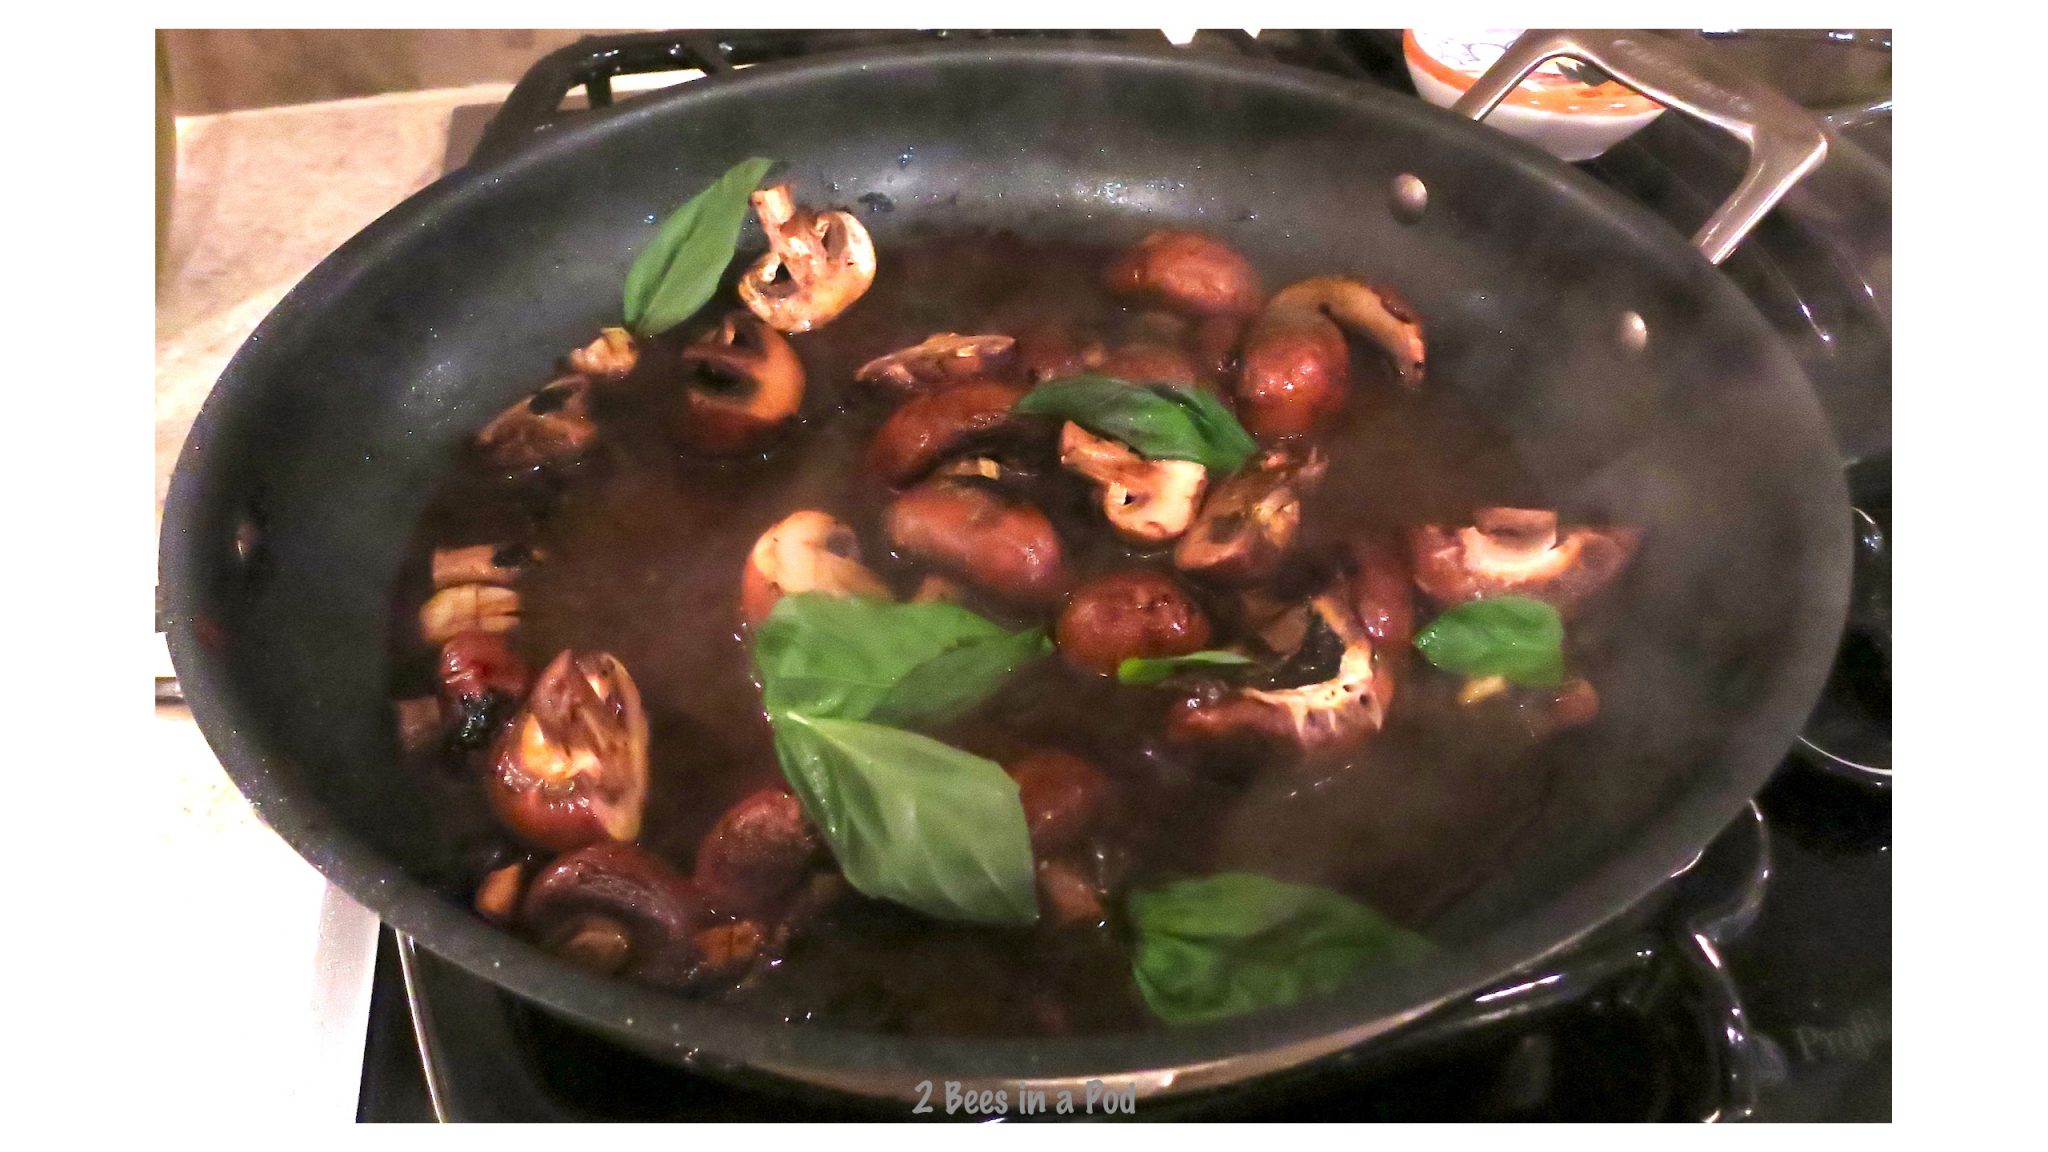 Almost Done - Glaze is reducing for Weight Watchers Balsamic Chicken with Mushrooms. It won't take too long for this to occur. 